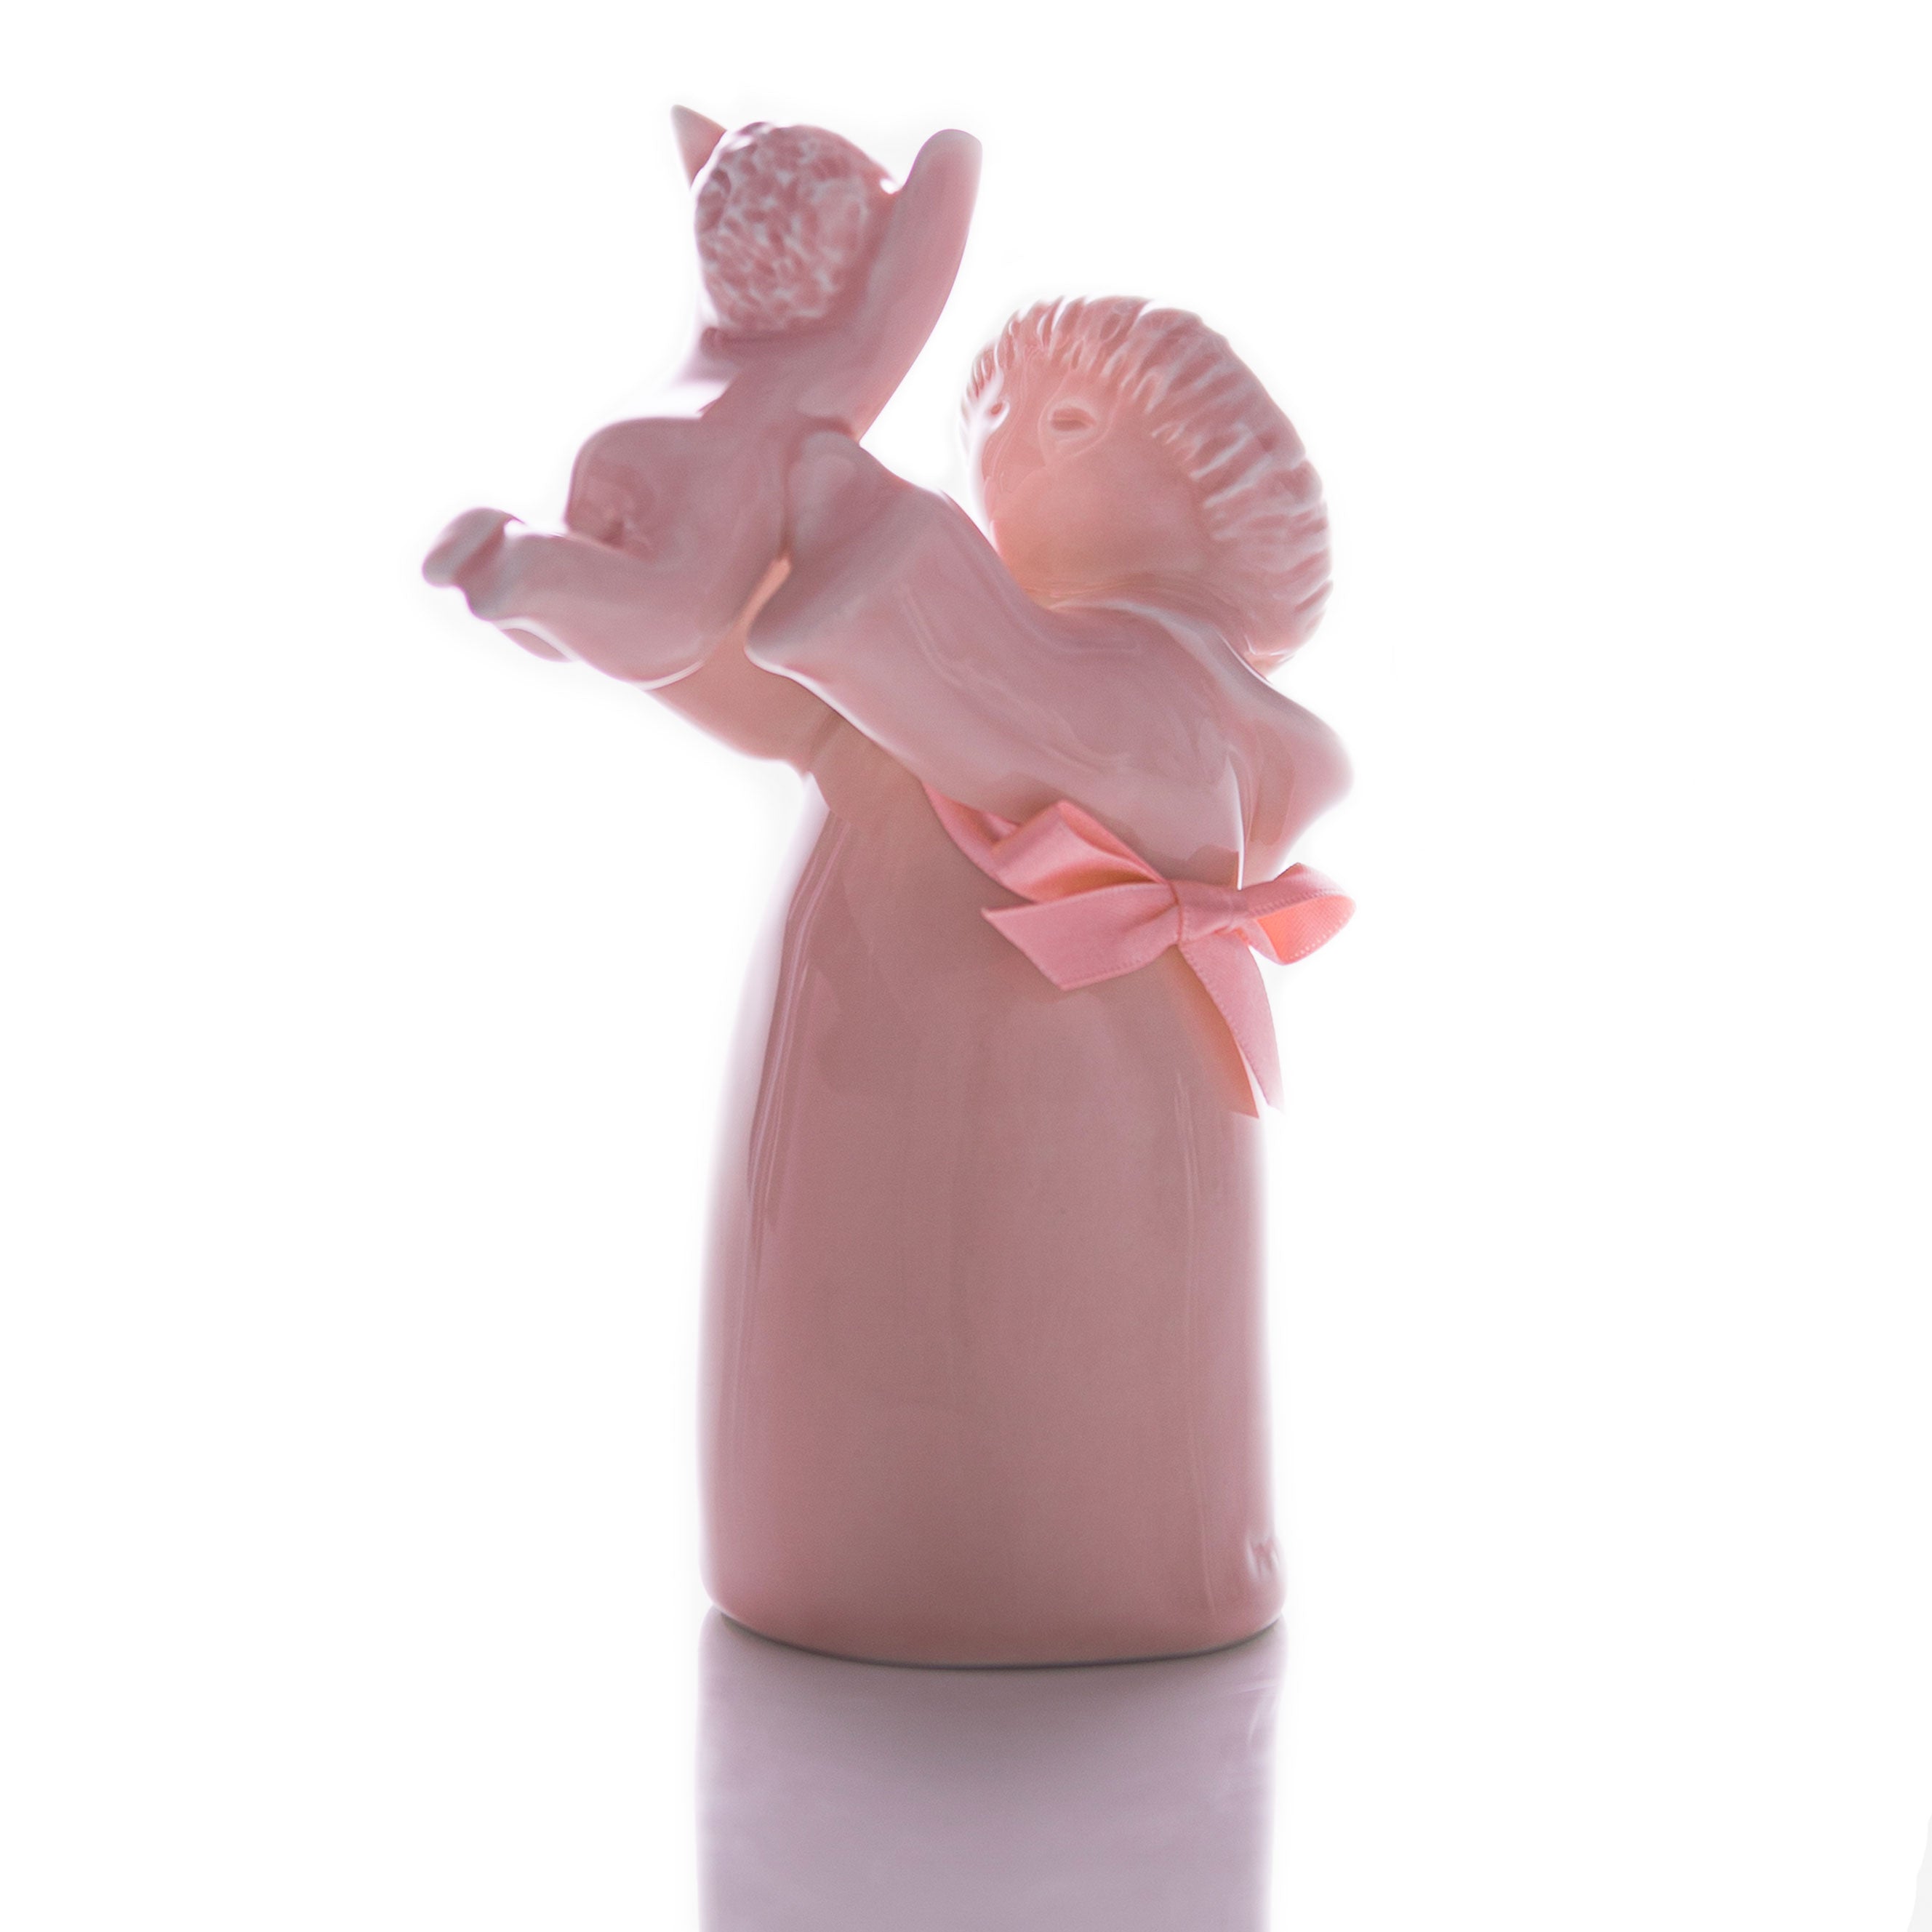 Our ceramic figurine, 100% handmade with sustainable materials, is a more modern take on the representation of this dear saint and is the perfect way of showing your faith and the values of kindness that Saint Anthony had.